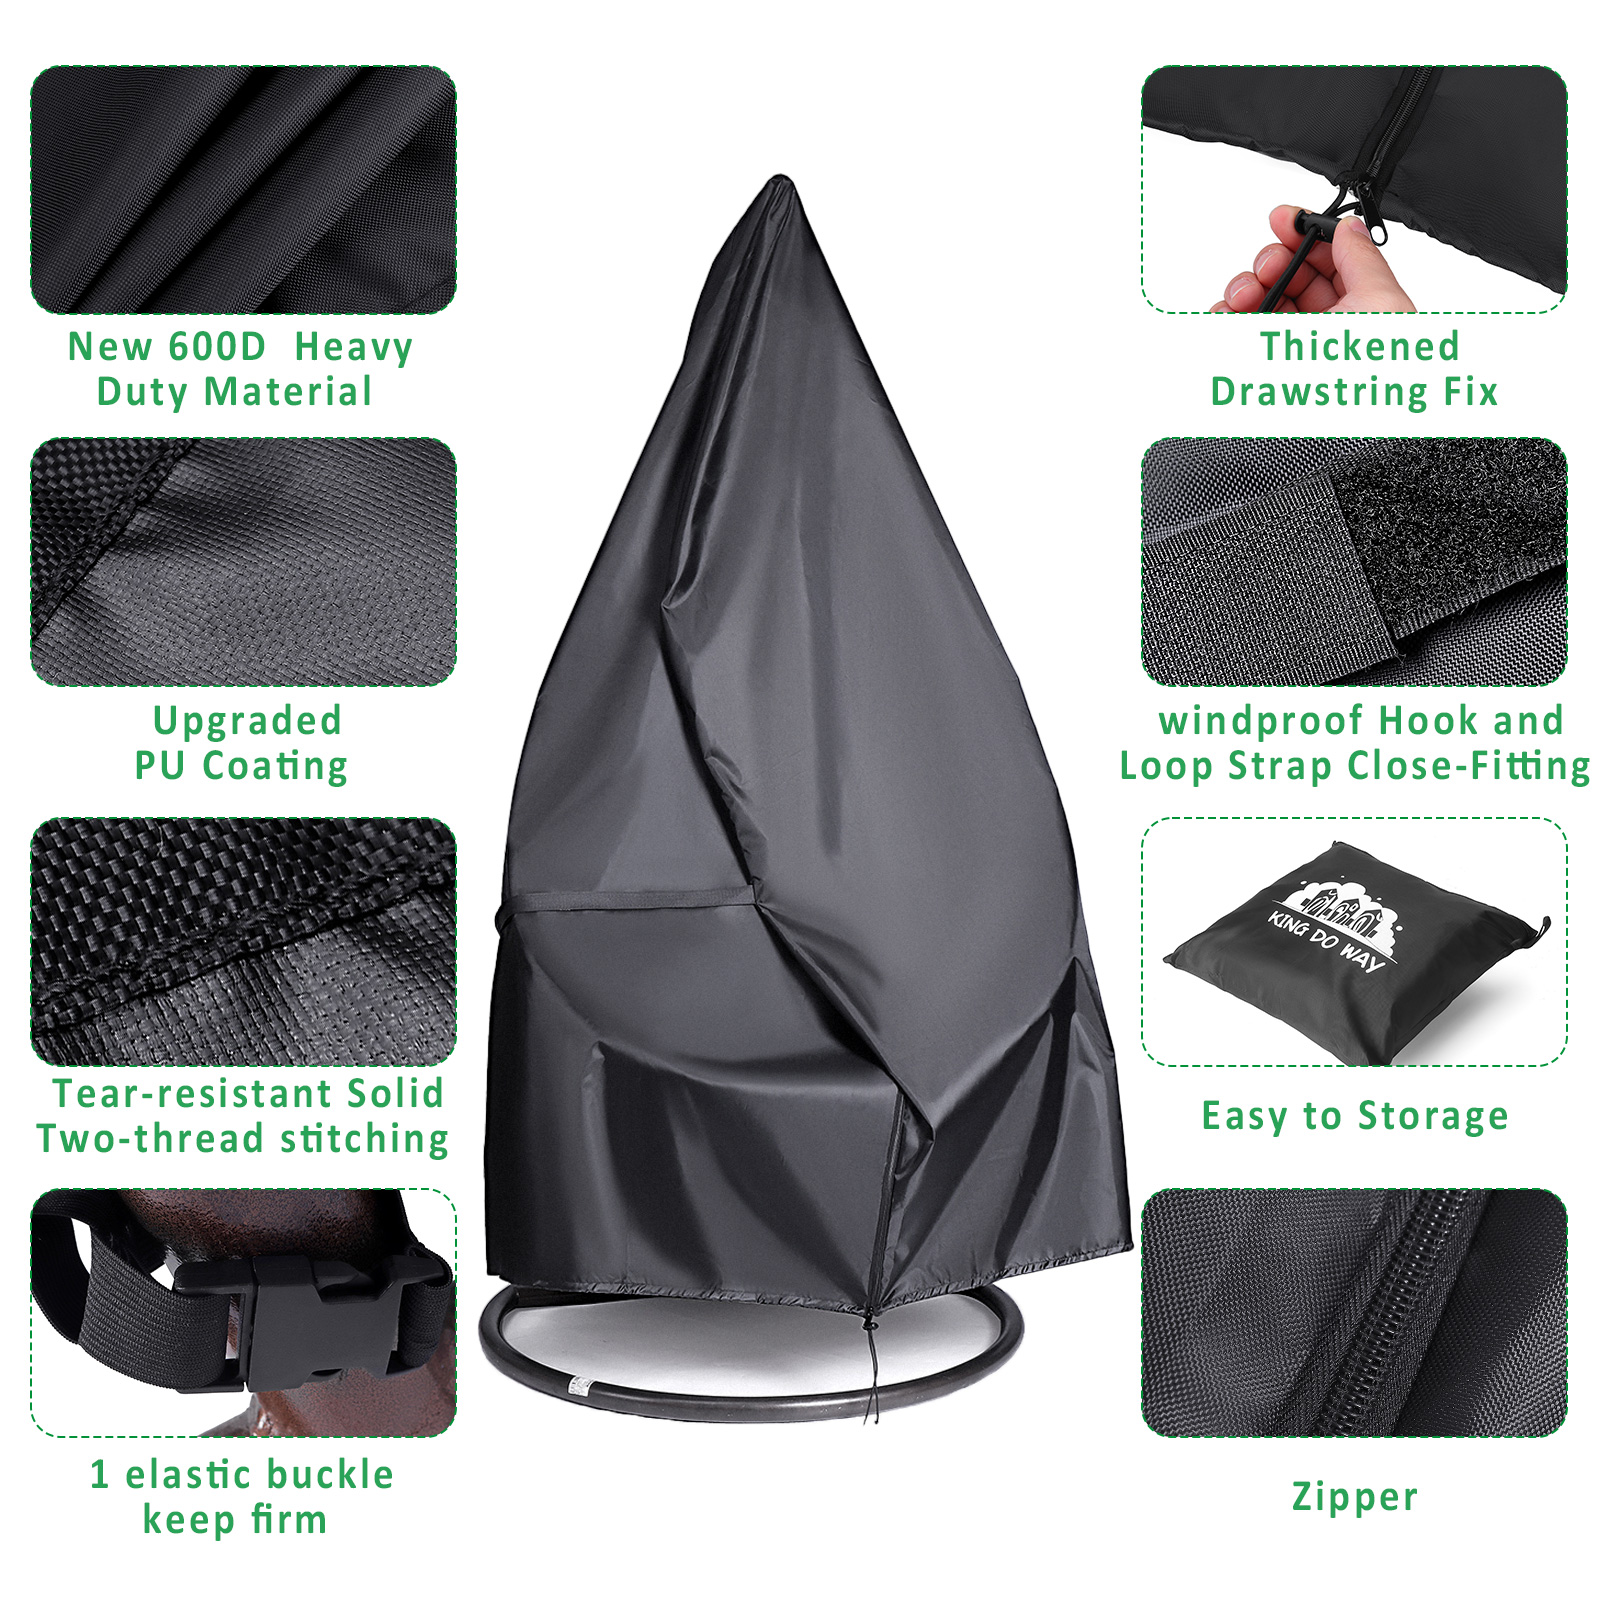 600D-Oxford-Cloth-PU-Coating-Egg-Chair-Cover-Windproof-Tear-resistant-Drawstring-Chair-Cover-1885509-3